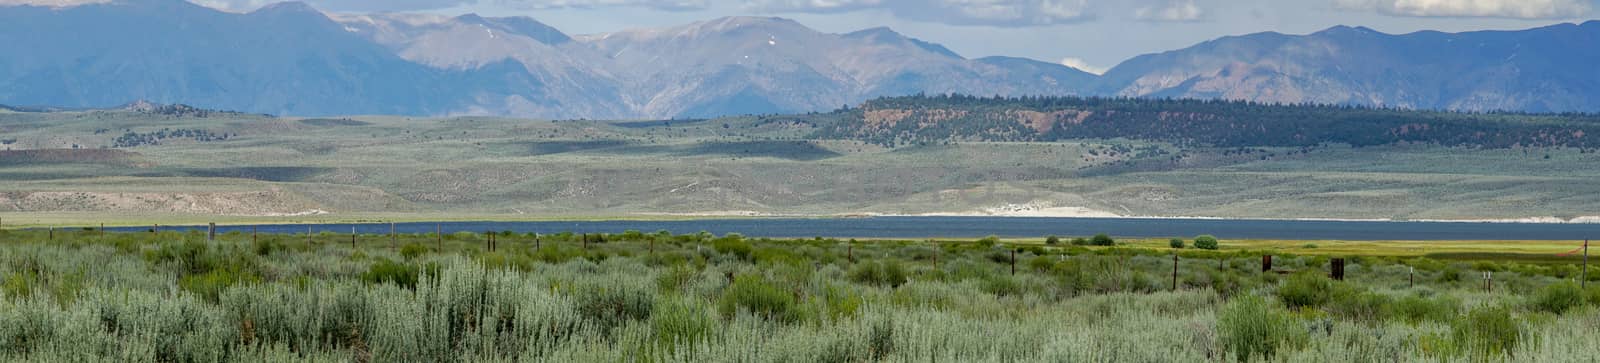 Green wild land with sagebrush plant and mountain in the background next the Lake Crowley, Eastern Sierra, Mono County, California, USA. 